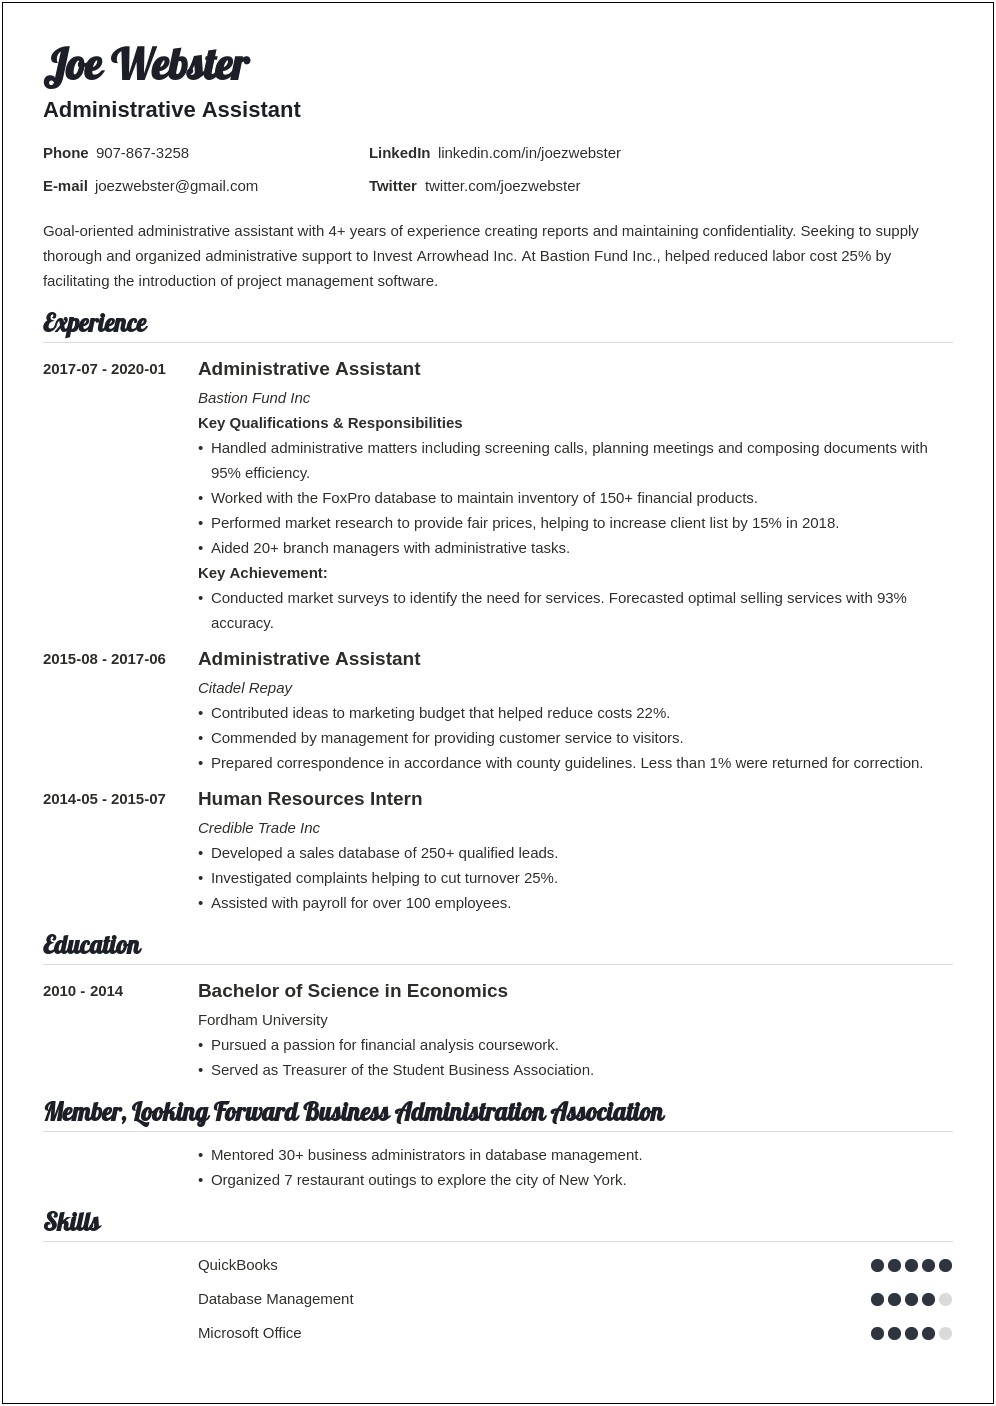 Examples Of Corporate Resumes For Banking Center Managers